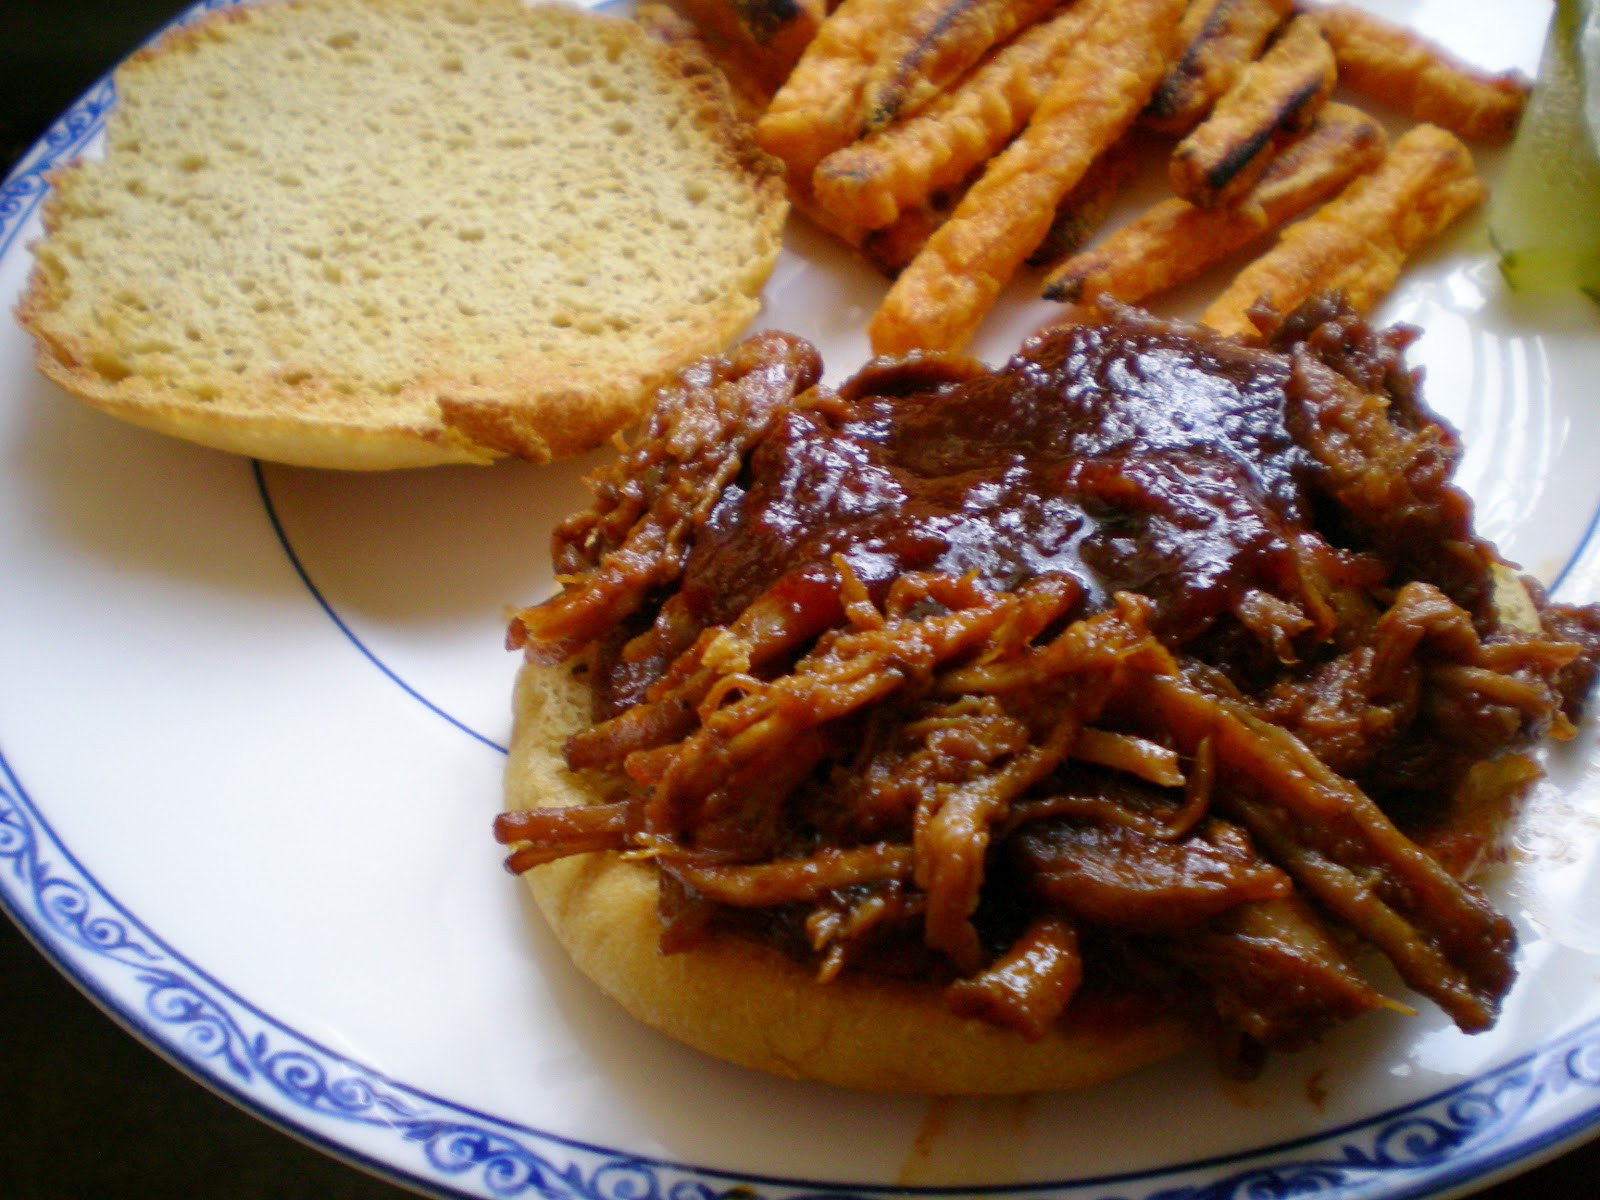 Bbq Sauce For Pulled Pork
 Slow Cooker BBQ Pulled Pork with Homemade Barbeque Sauce